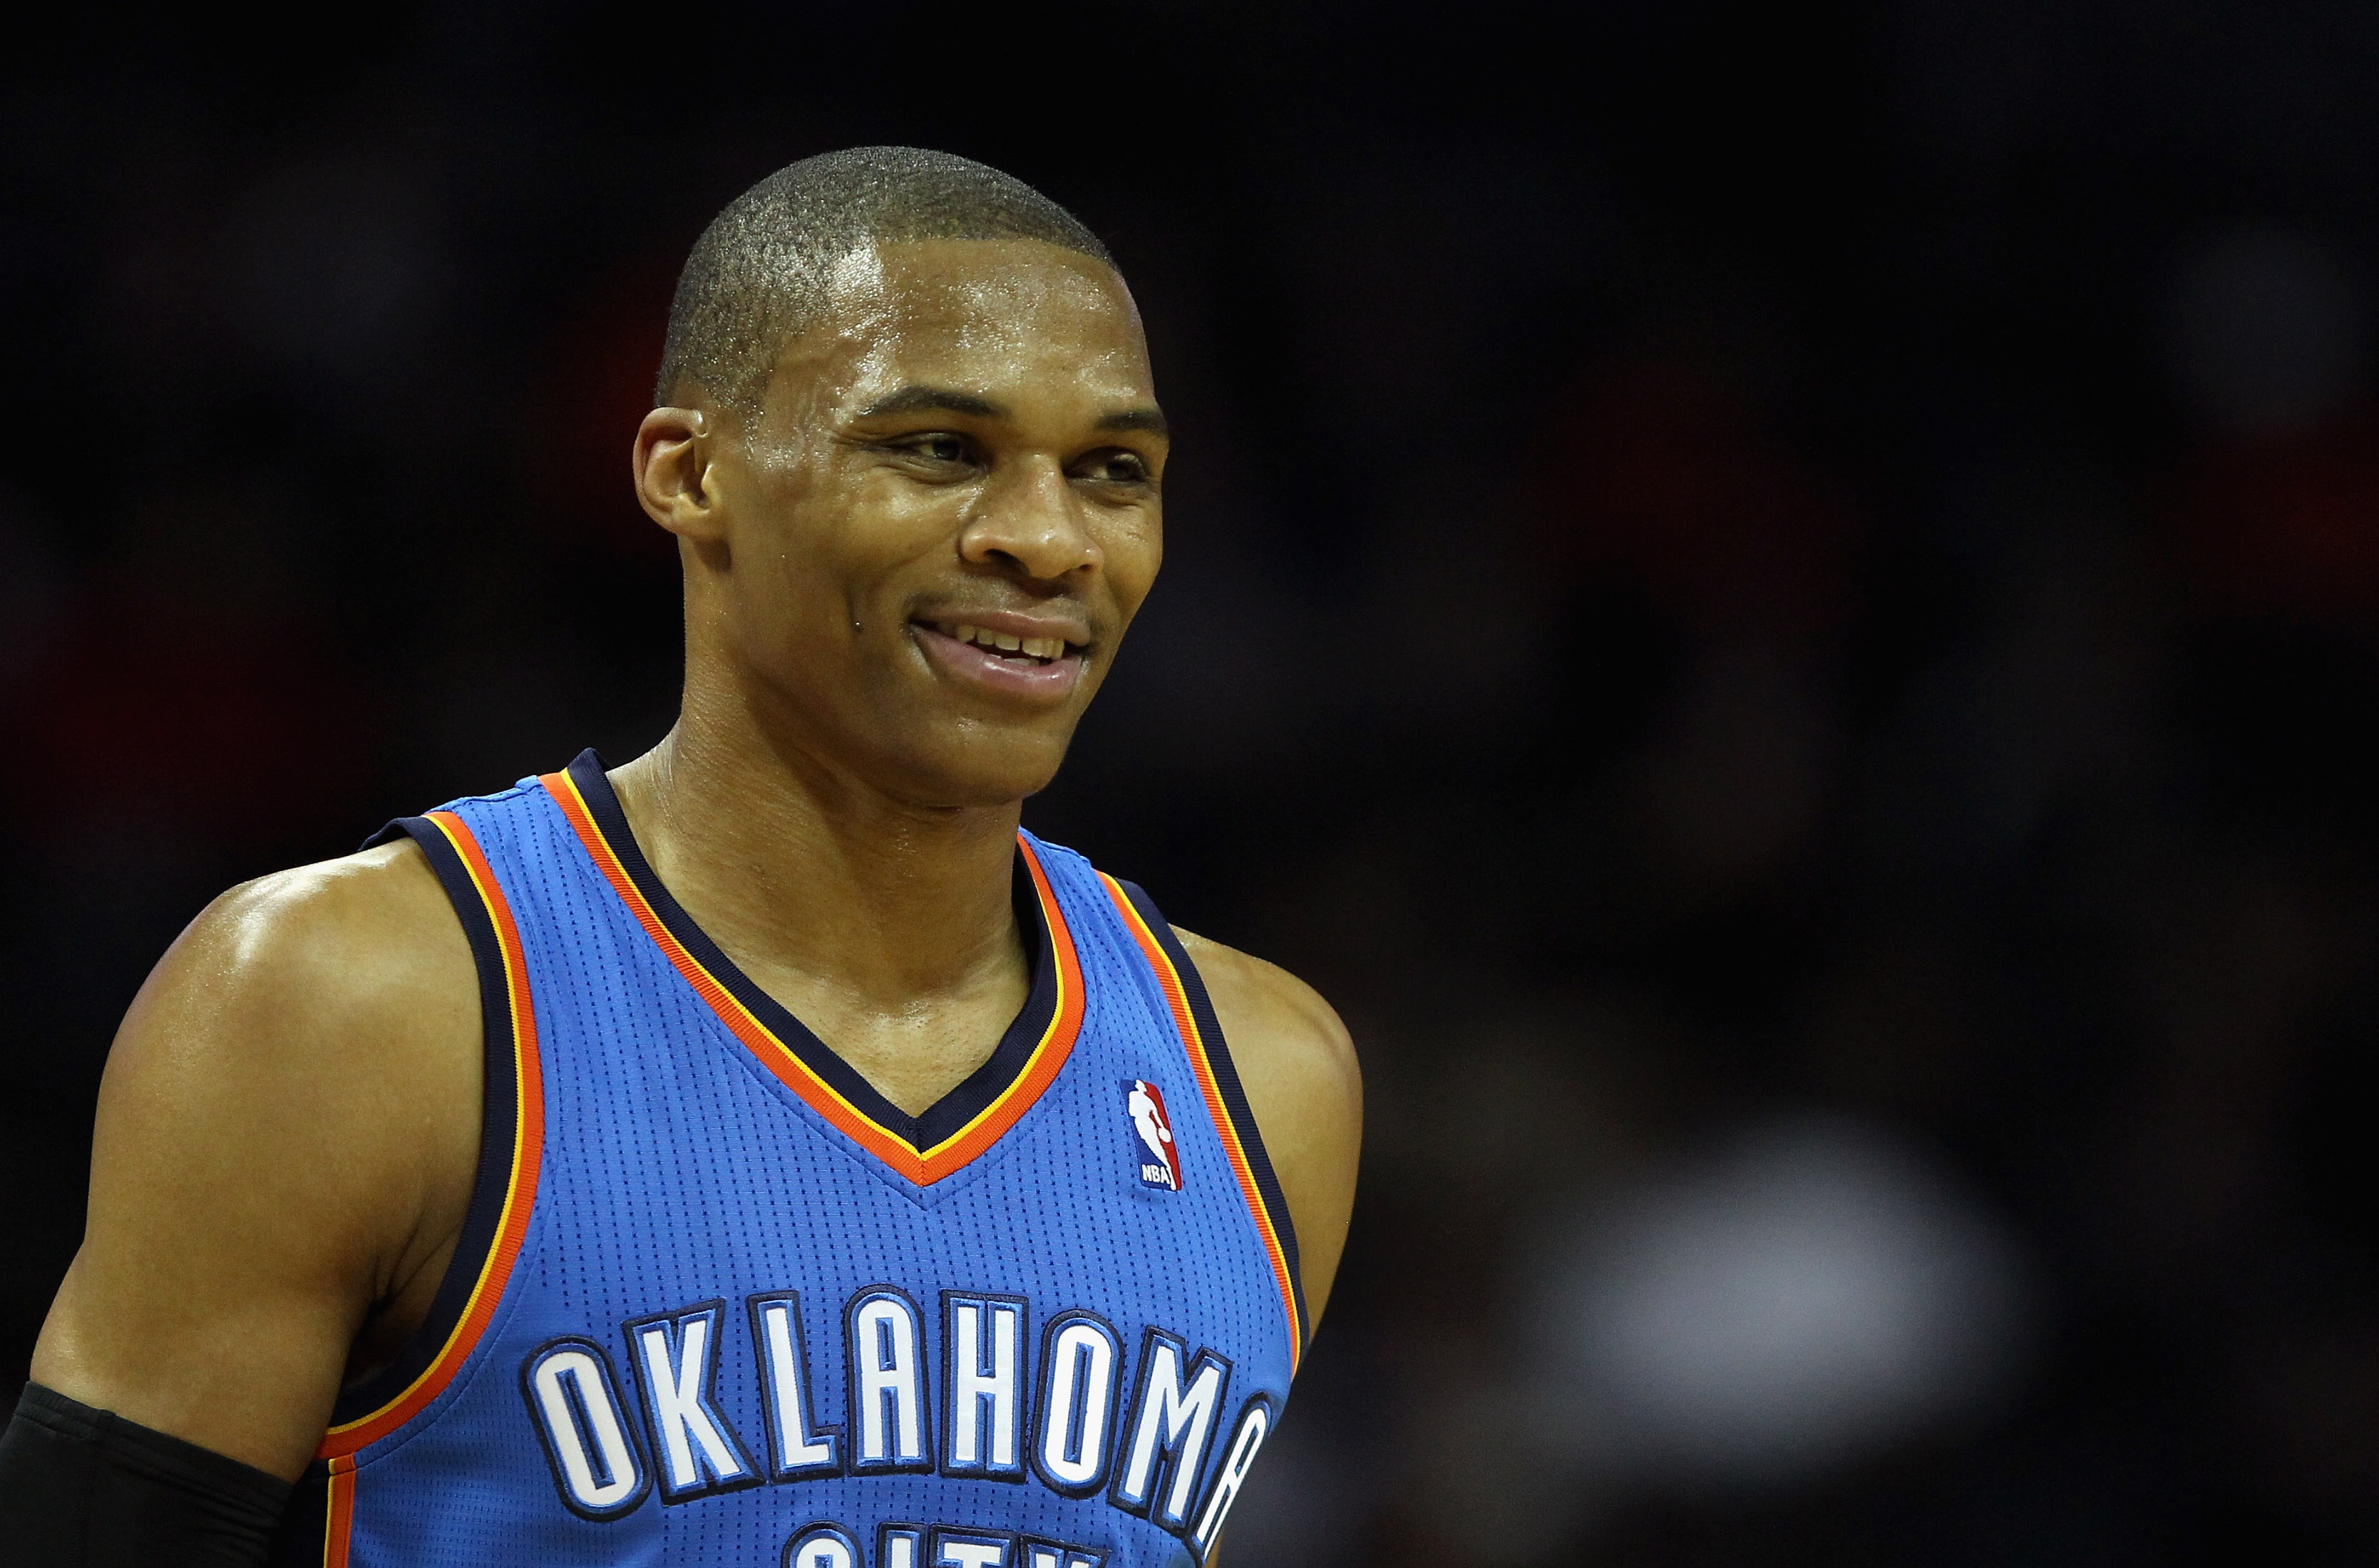 CHARLOTTE, NC - DECEMBER 21:  Russell Westbrook #0 of the Oklahoma Thunder reacts to a call against the Charlotte Bobcats during their game at Time Warner Cable Arena on December 21, 2010 in Charlotte, North Carolina. NOTE TO USER: User expressly acknowle